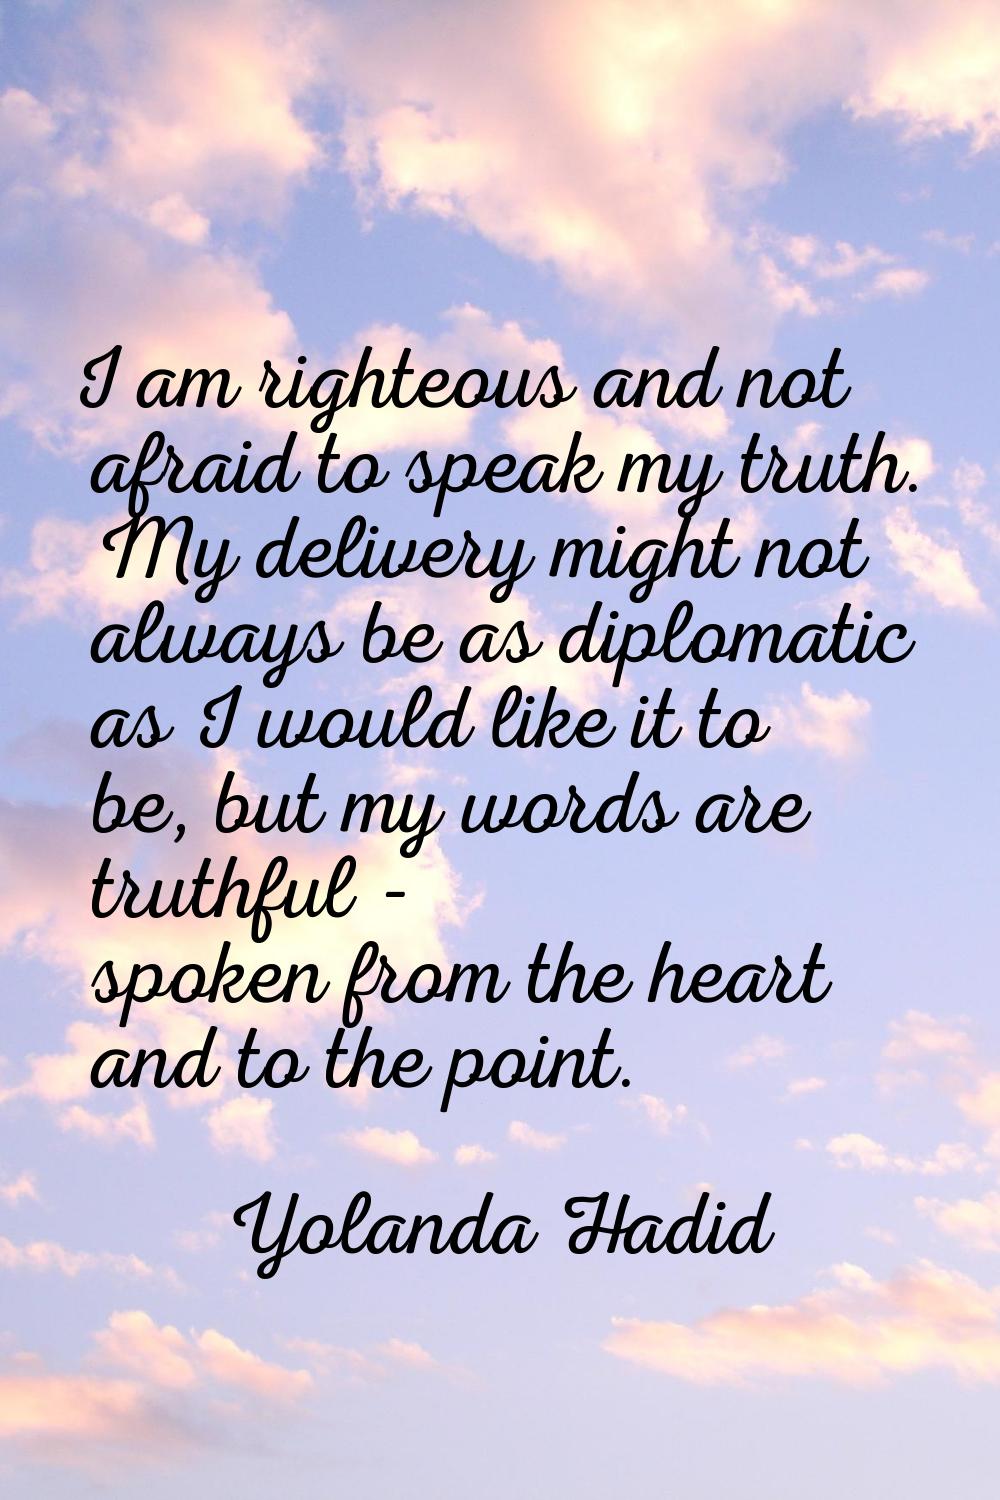 I am righteous and not afraid to speak my truth. My delivery might not always be as diplomatic as I